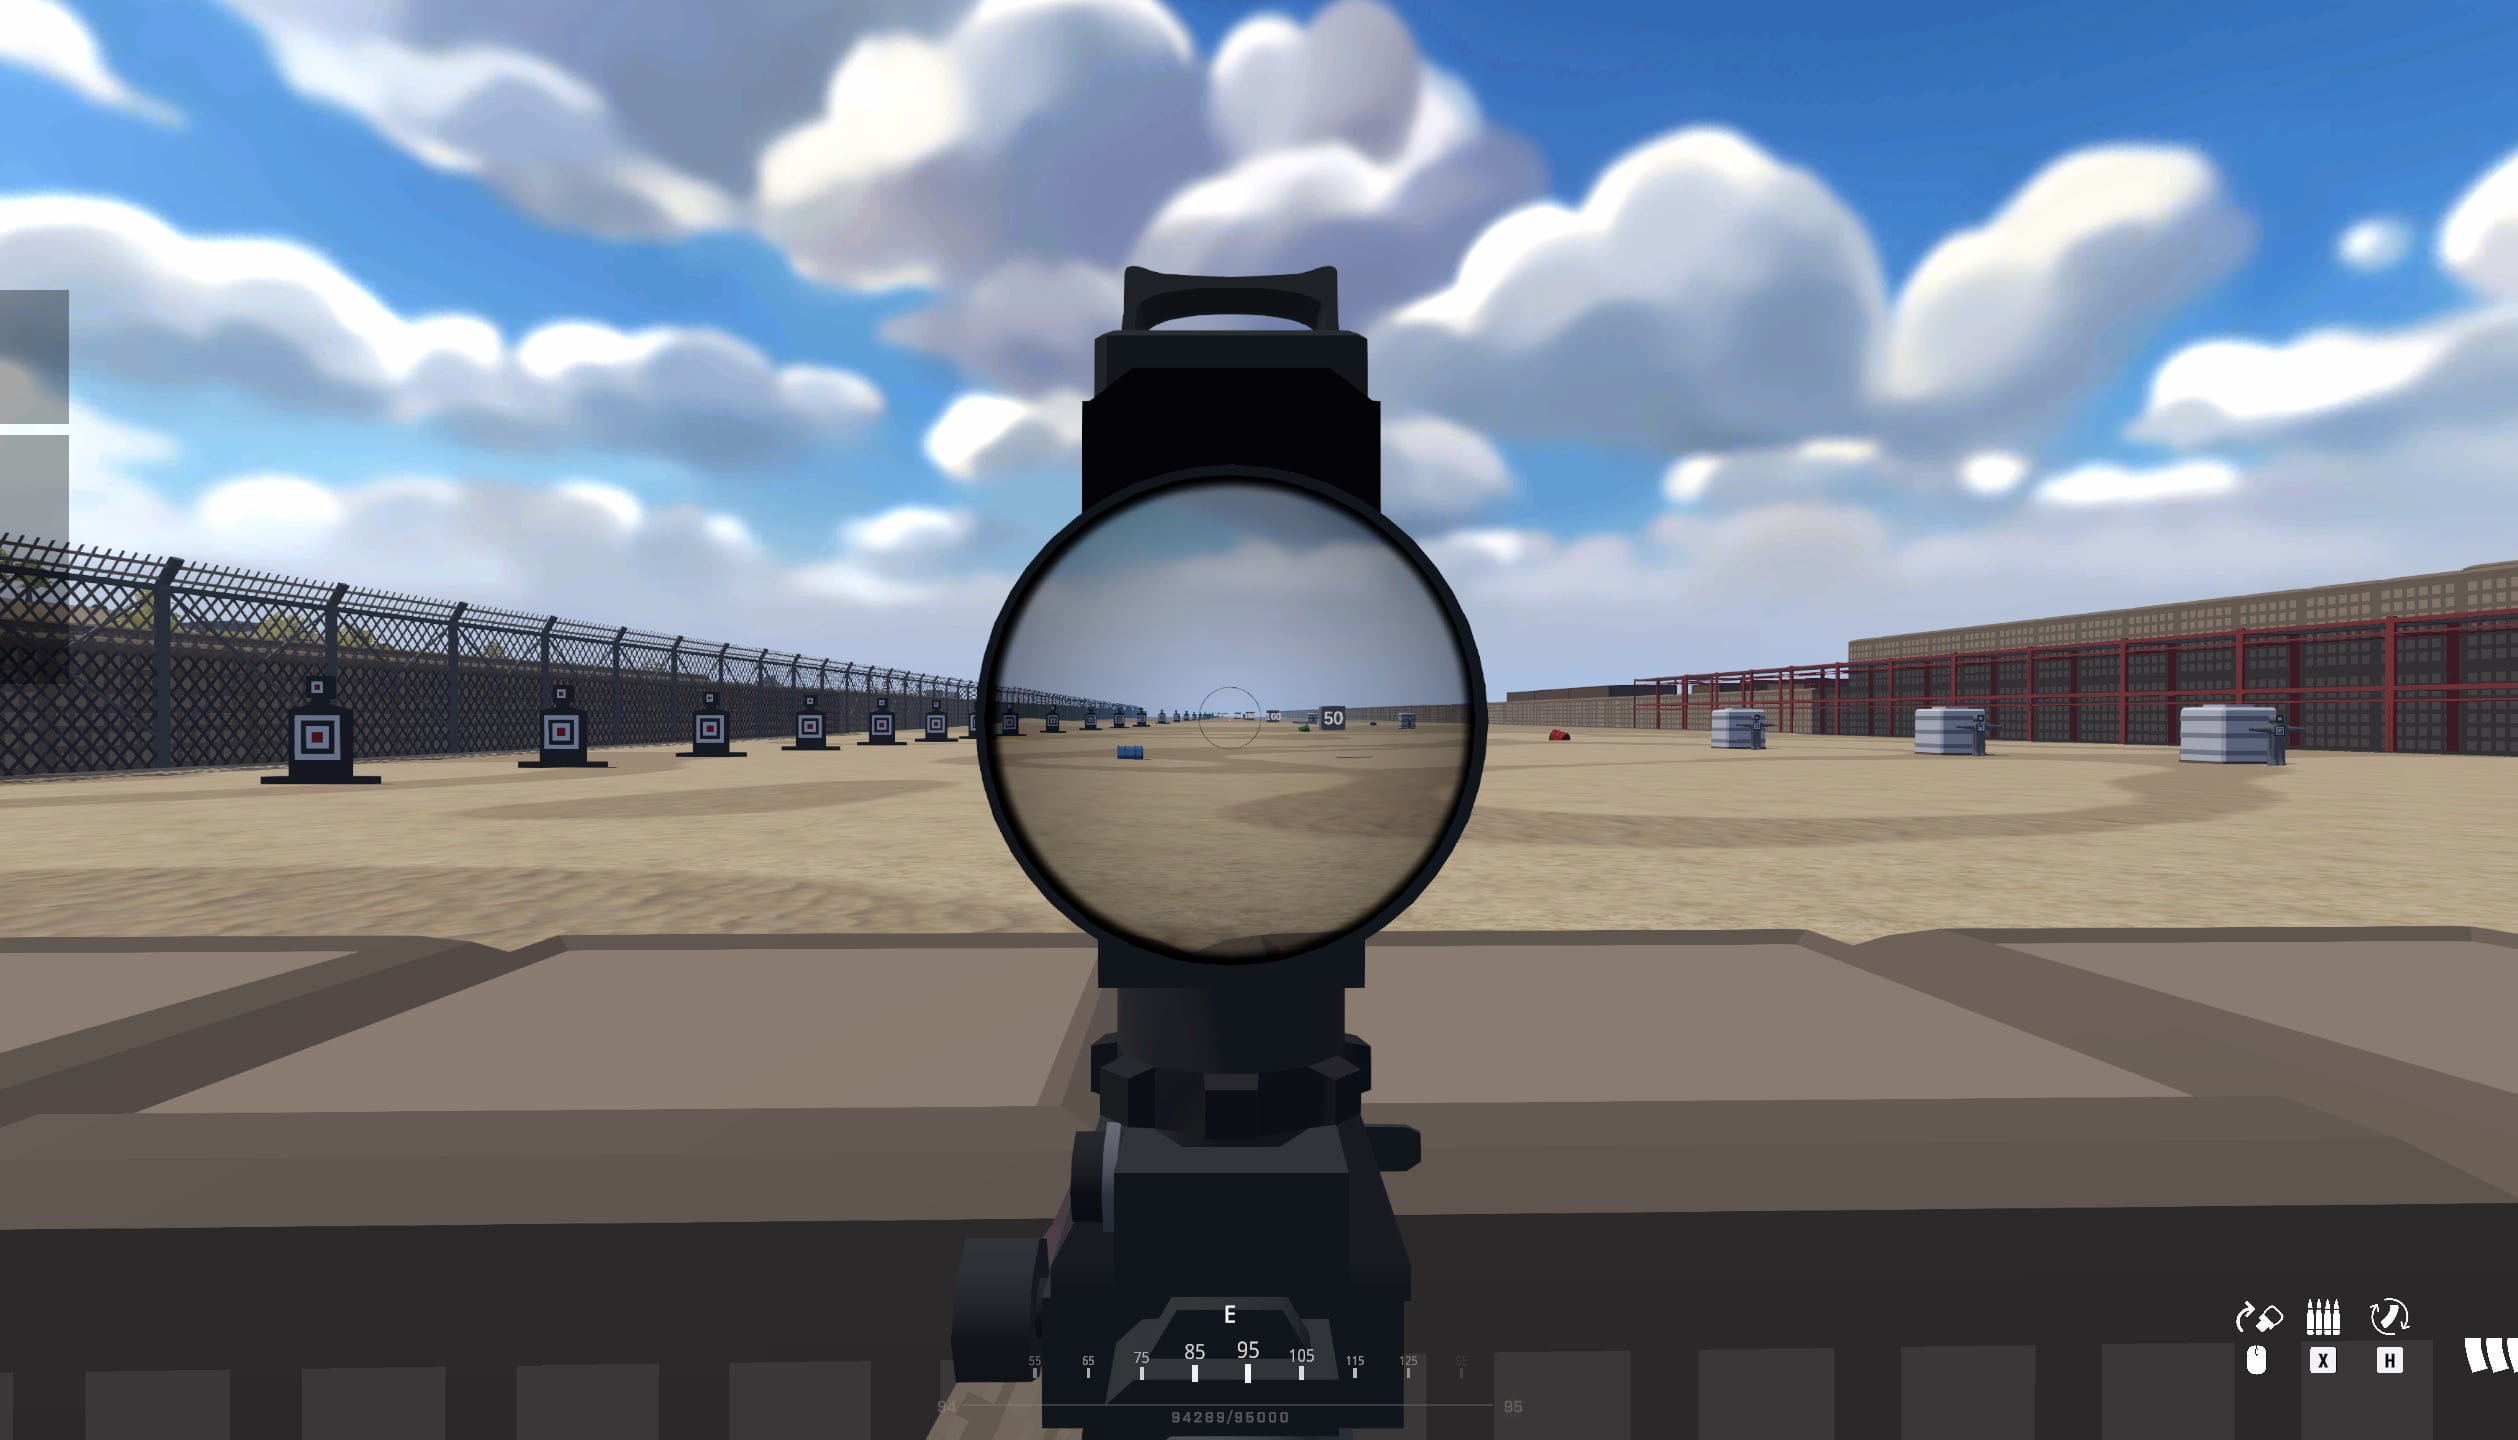 Weapon Sights/Scopes